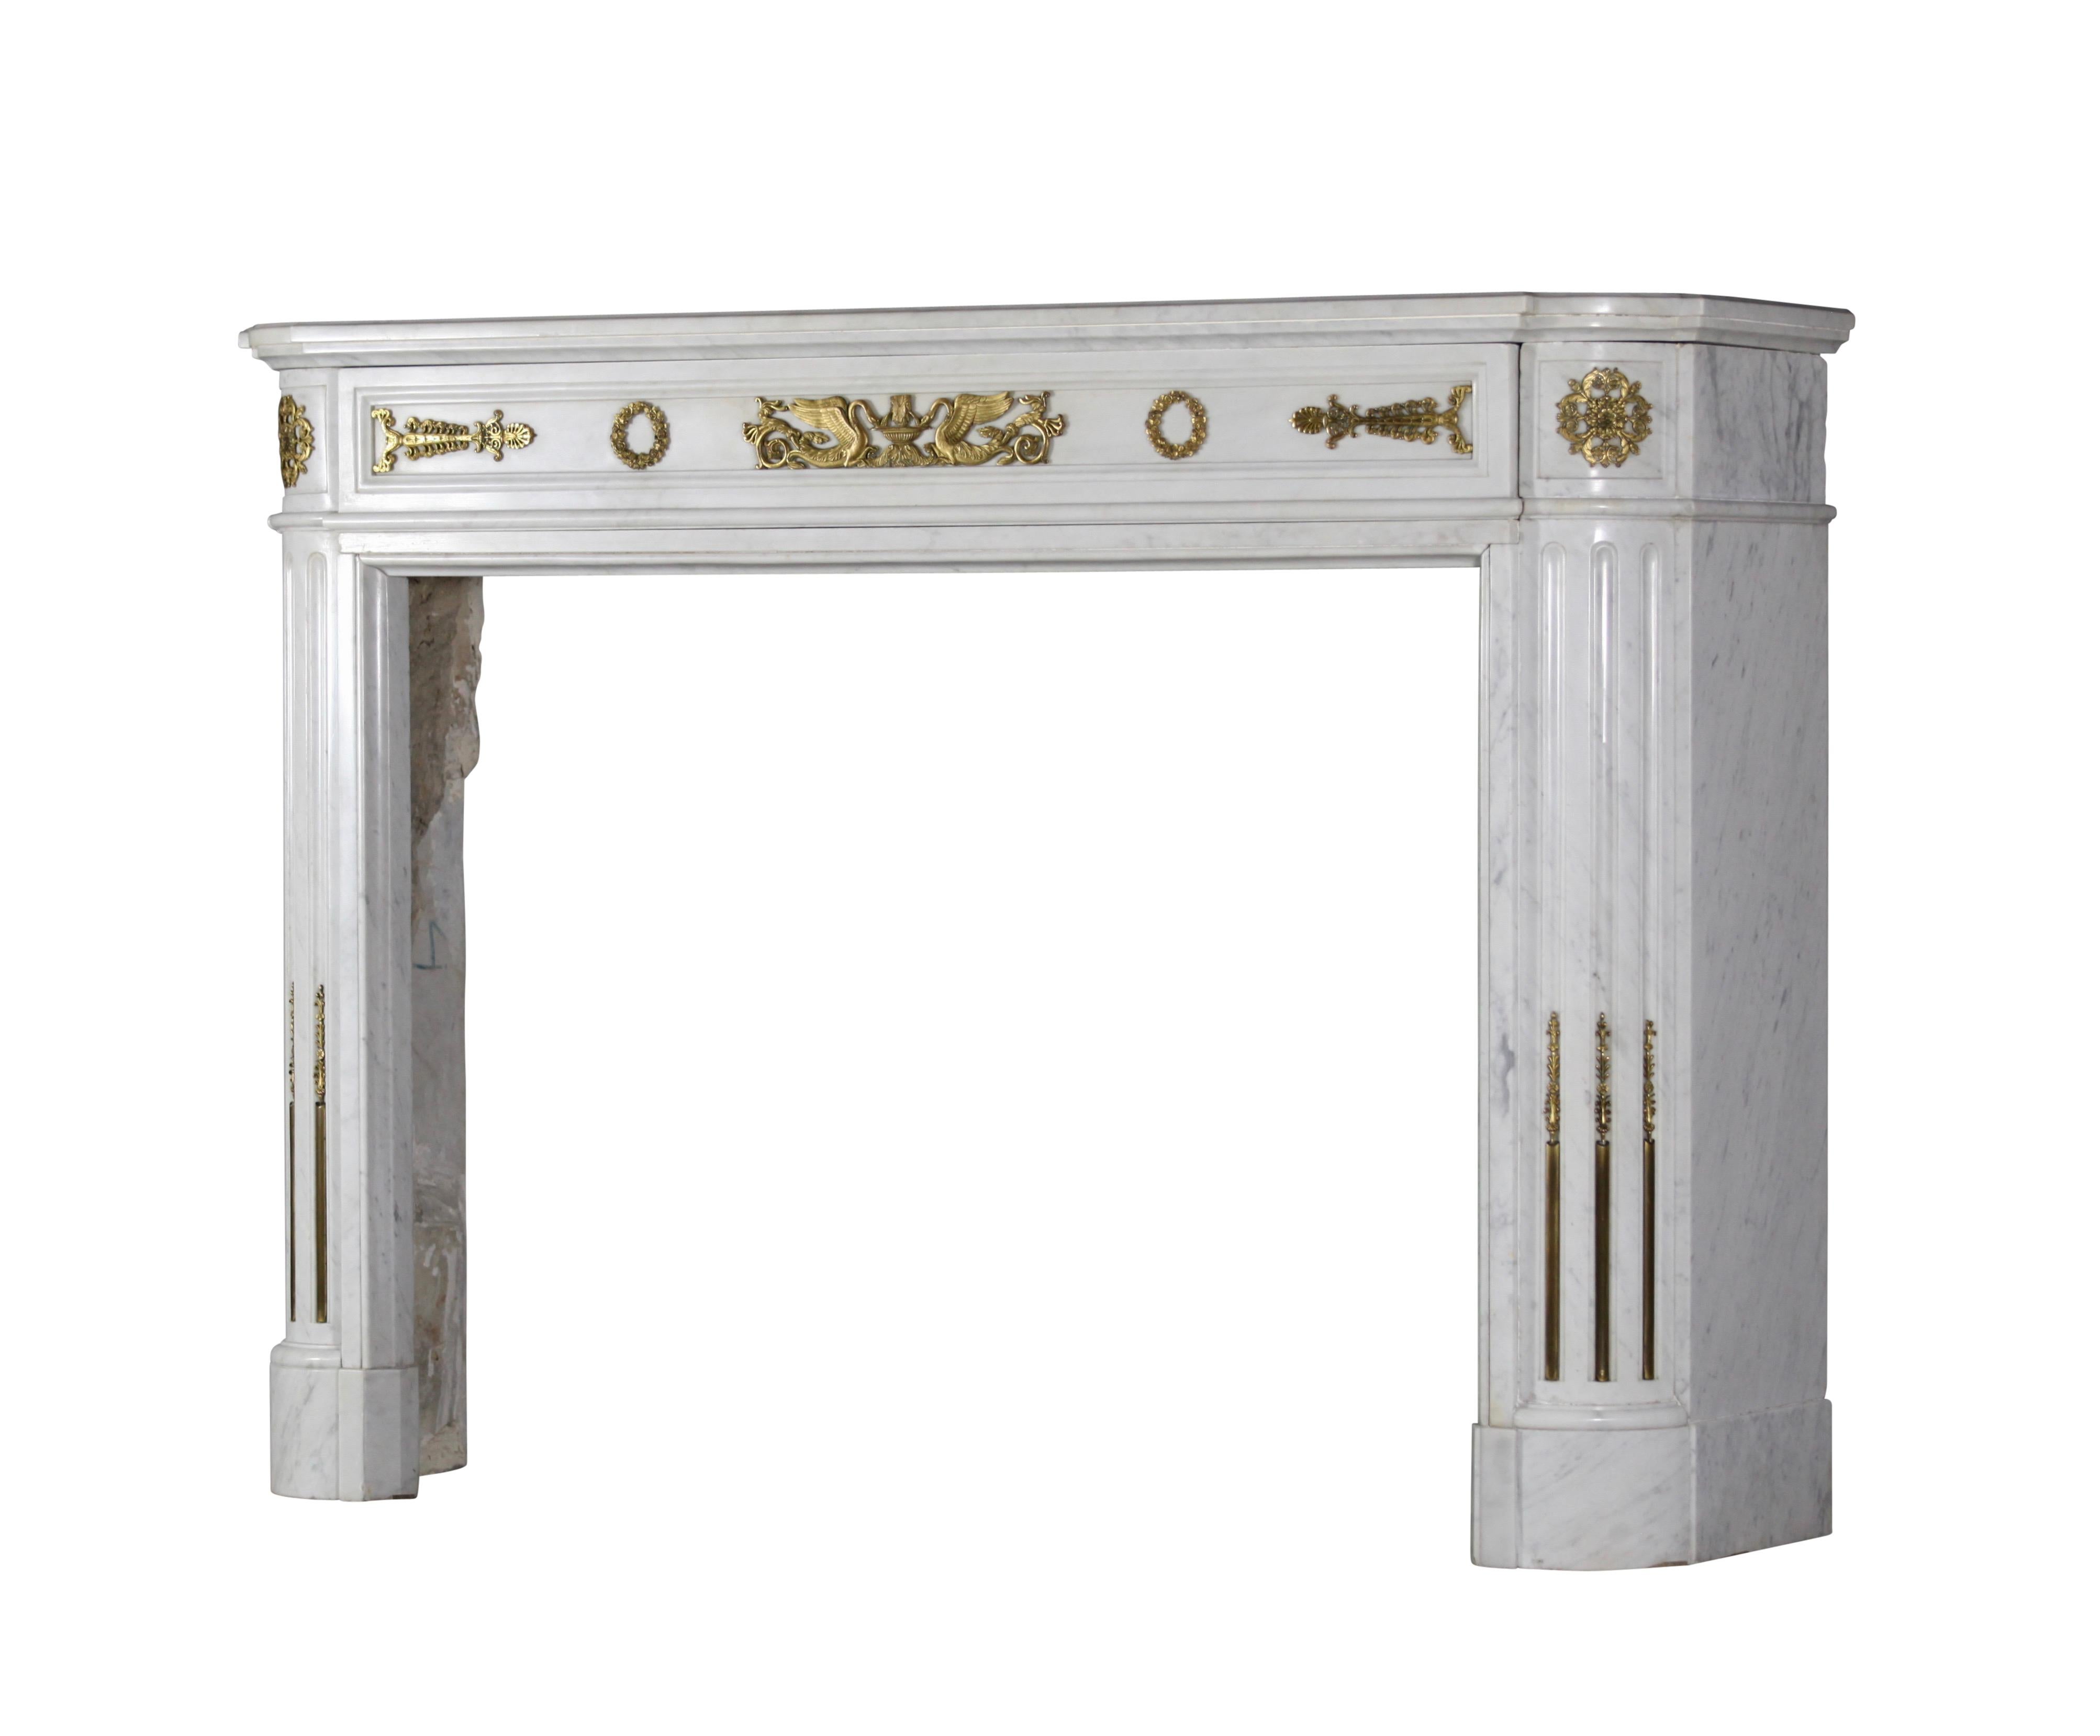 This original vintage fireplace surround is a one of a kind chimney piece. A real eyecatcher. It is influenced of the wars by Napoleon to Egypt.
The mantel is in perfect condition and ready to be installed.
The brass is original.
This beauty is